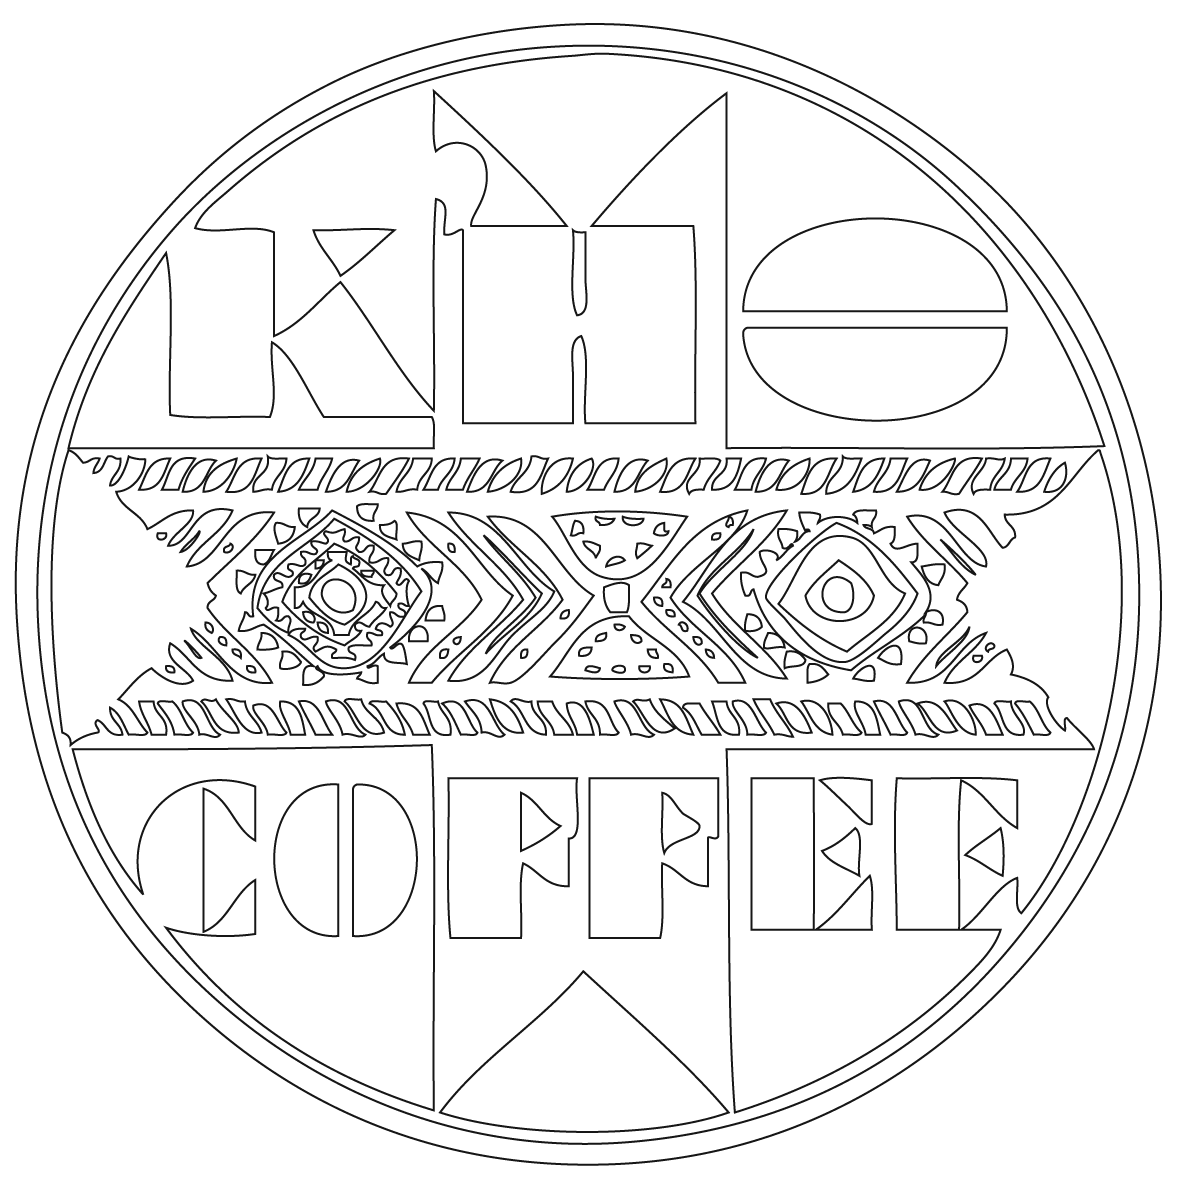 Black and White Half Circle Mountain Logo - K'Ho Coffee, The Montagnards, a group of ethnic minority K'Ho tribes ...